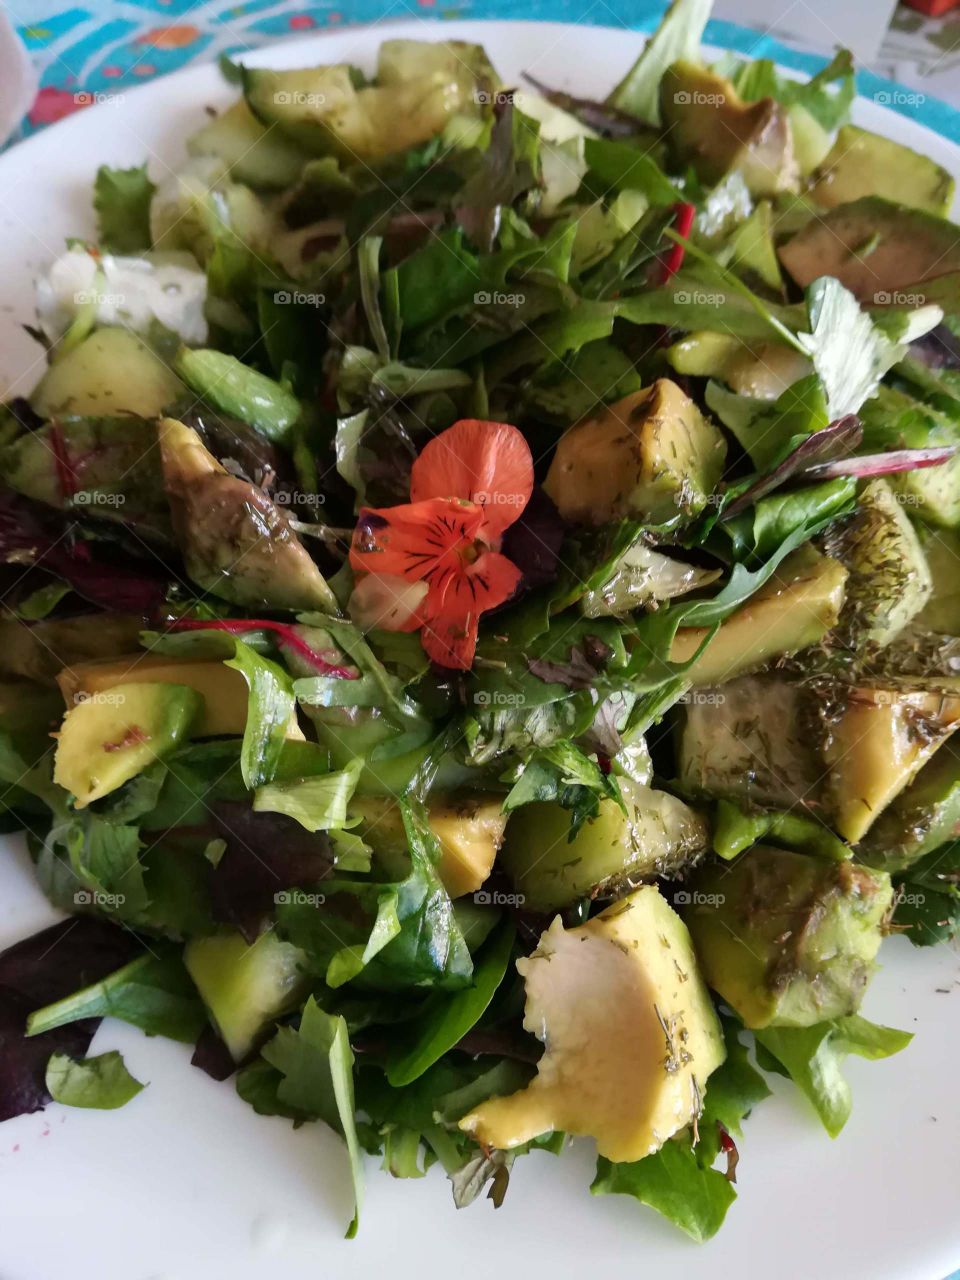 Salad with avocado and flowers